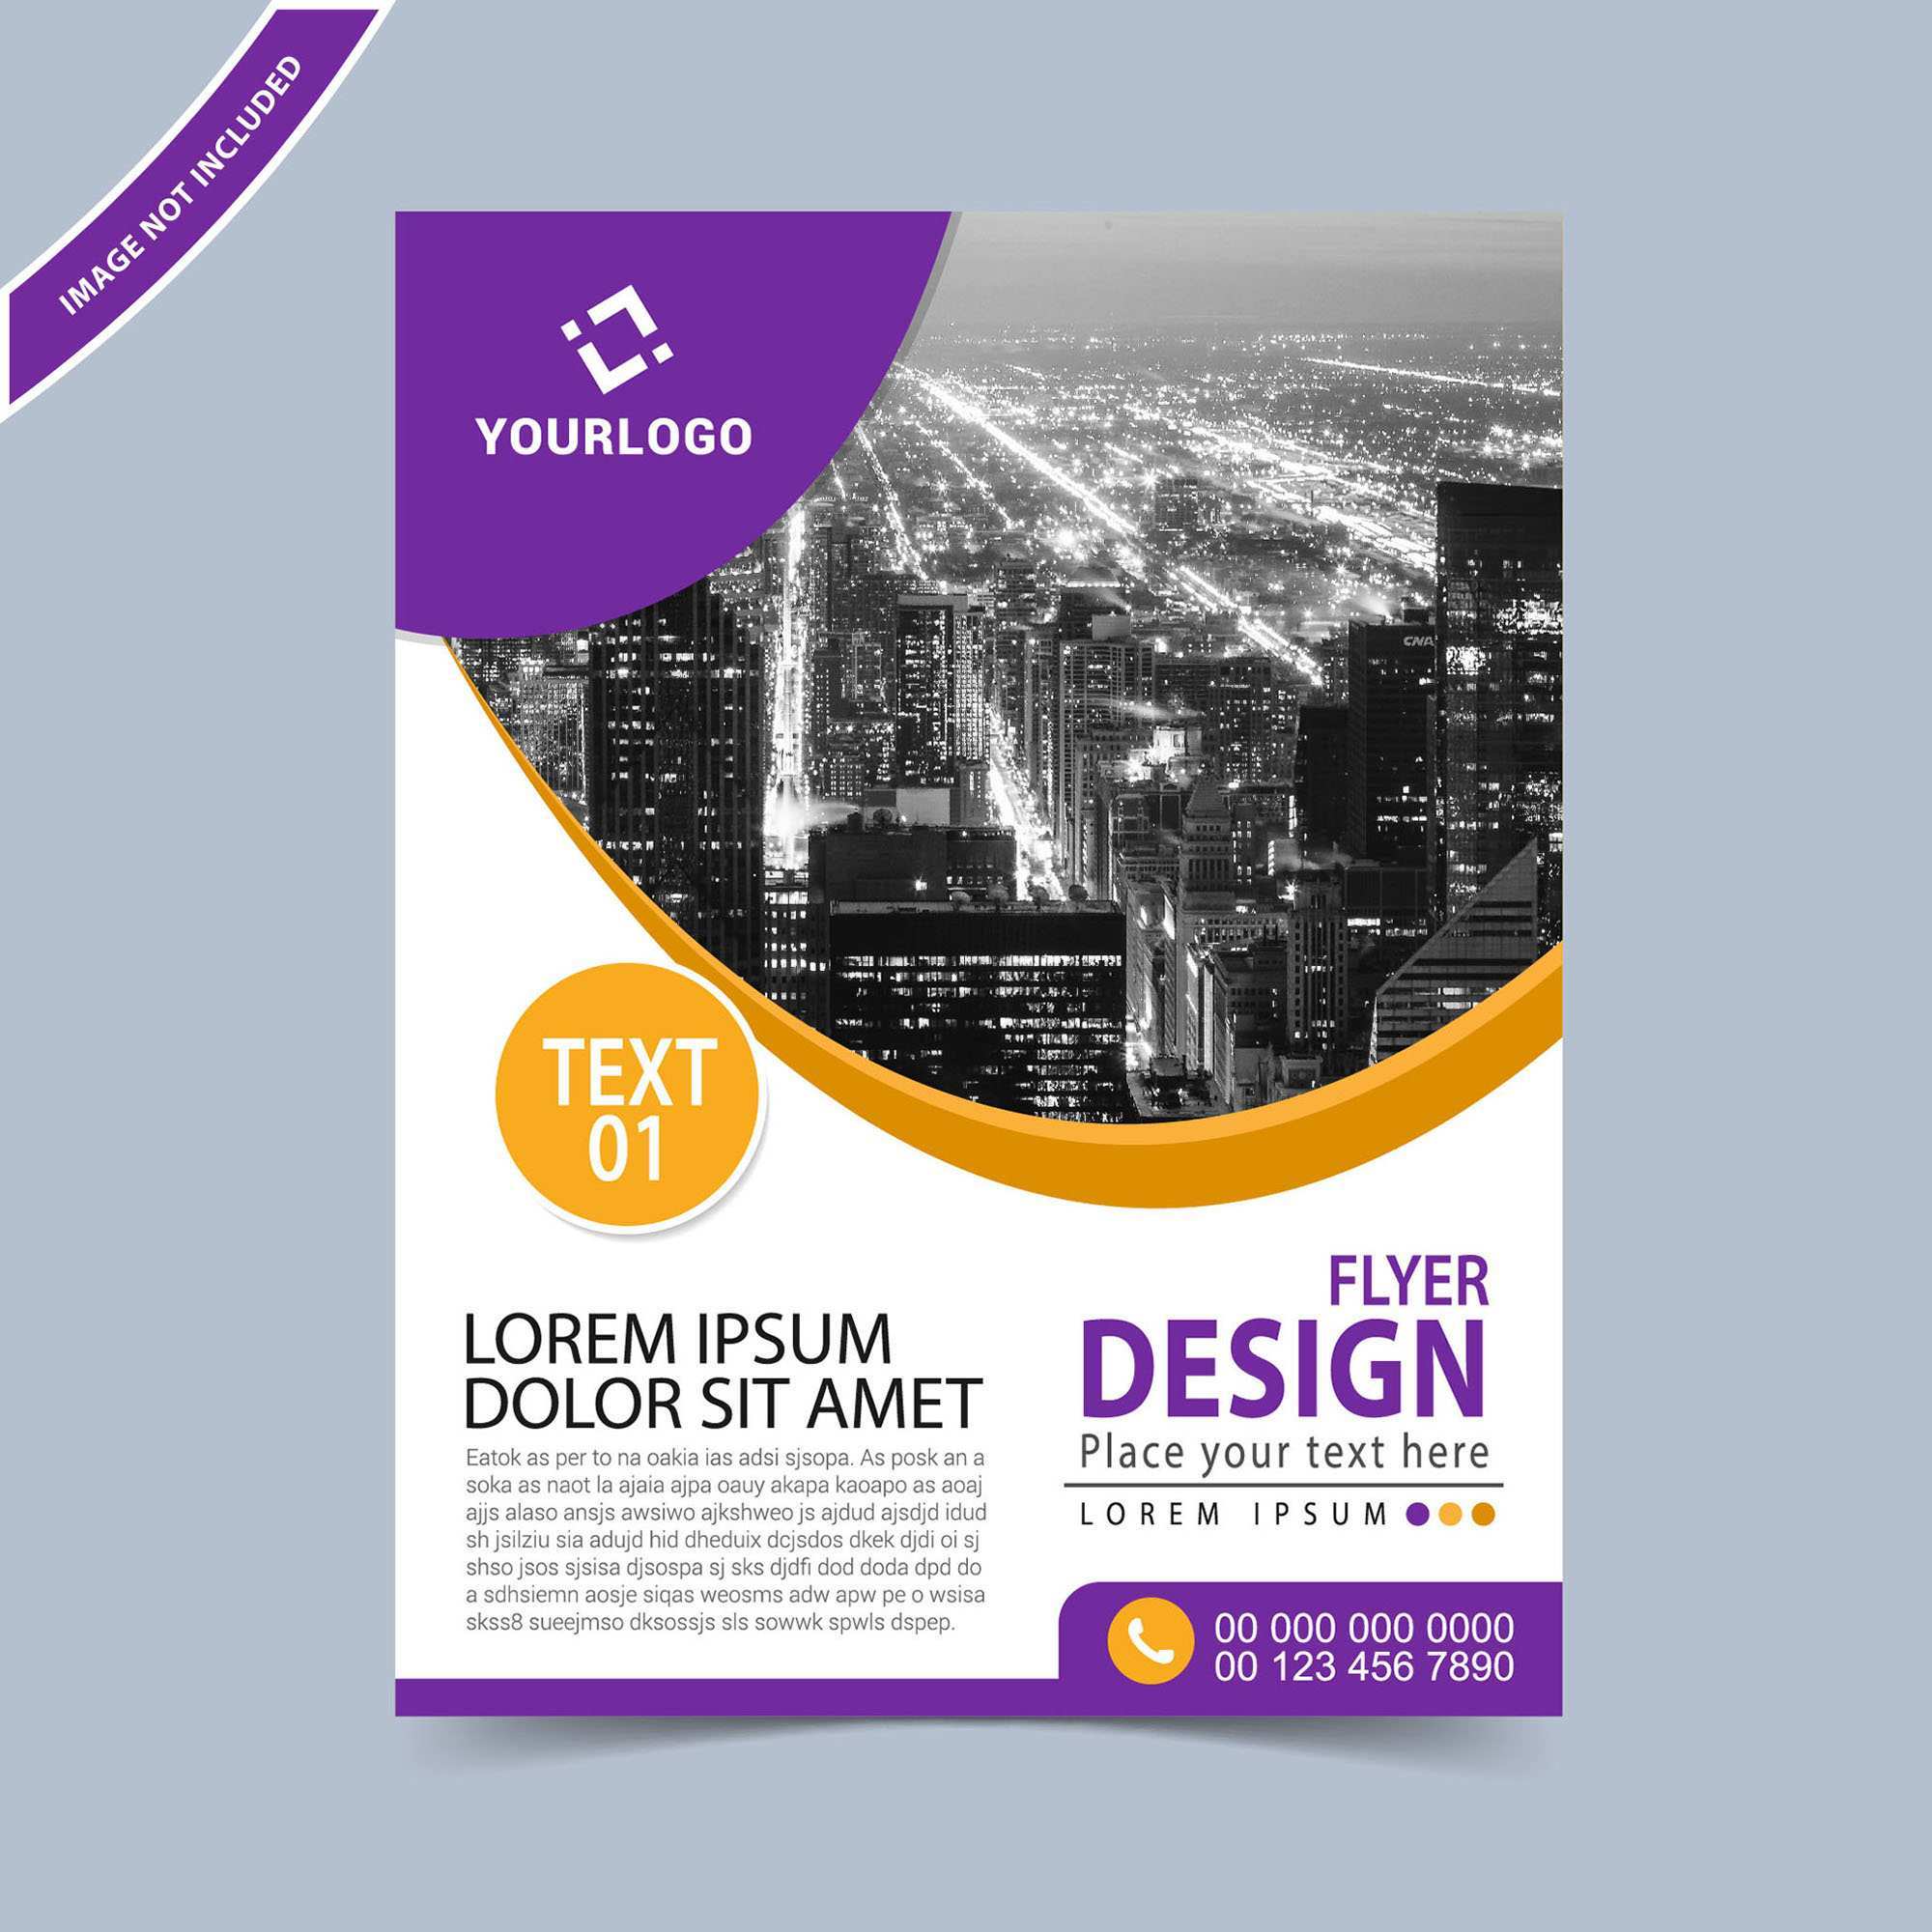 62 Standard Free Design Templates For Flyers Layouts by Free Design Templates For Flyers